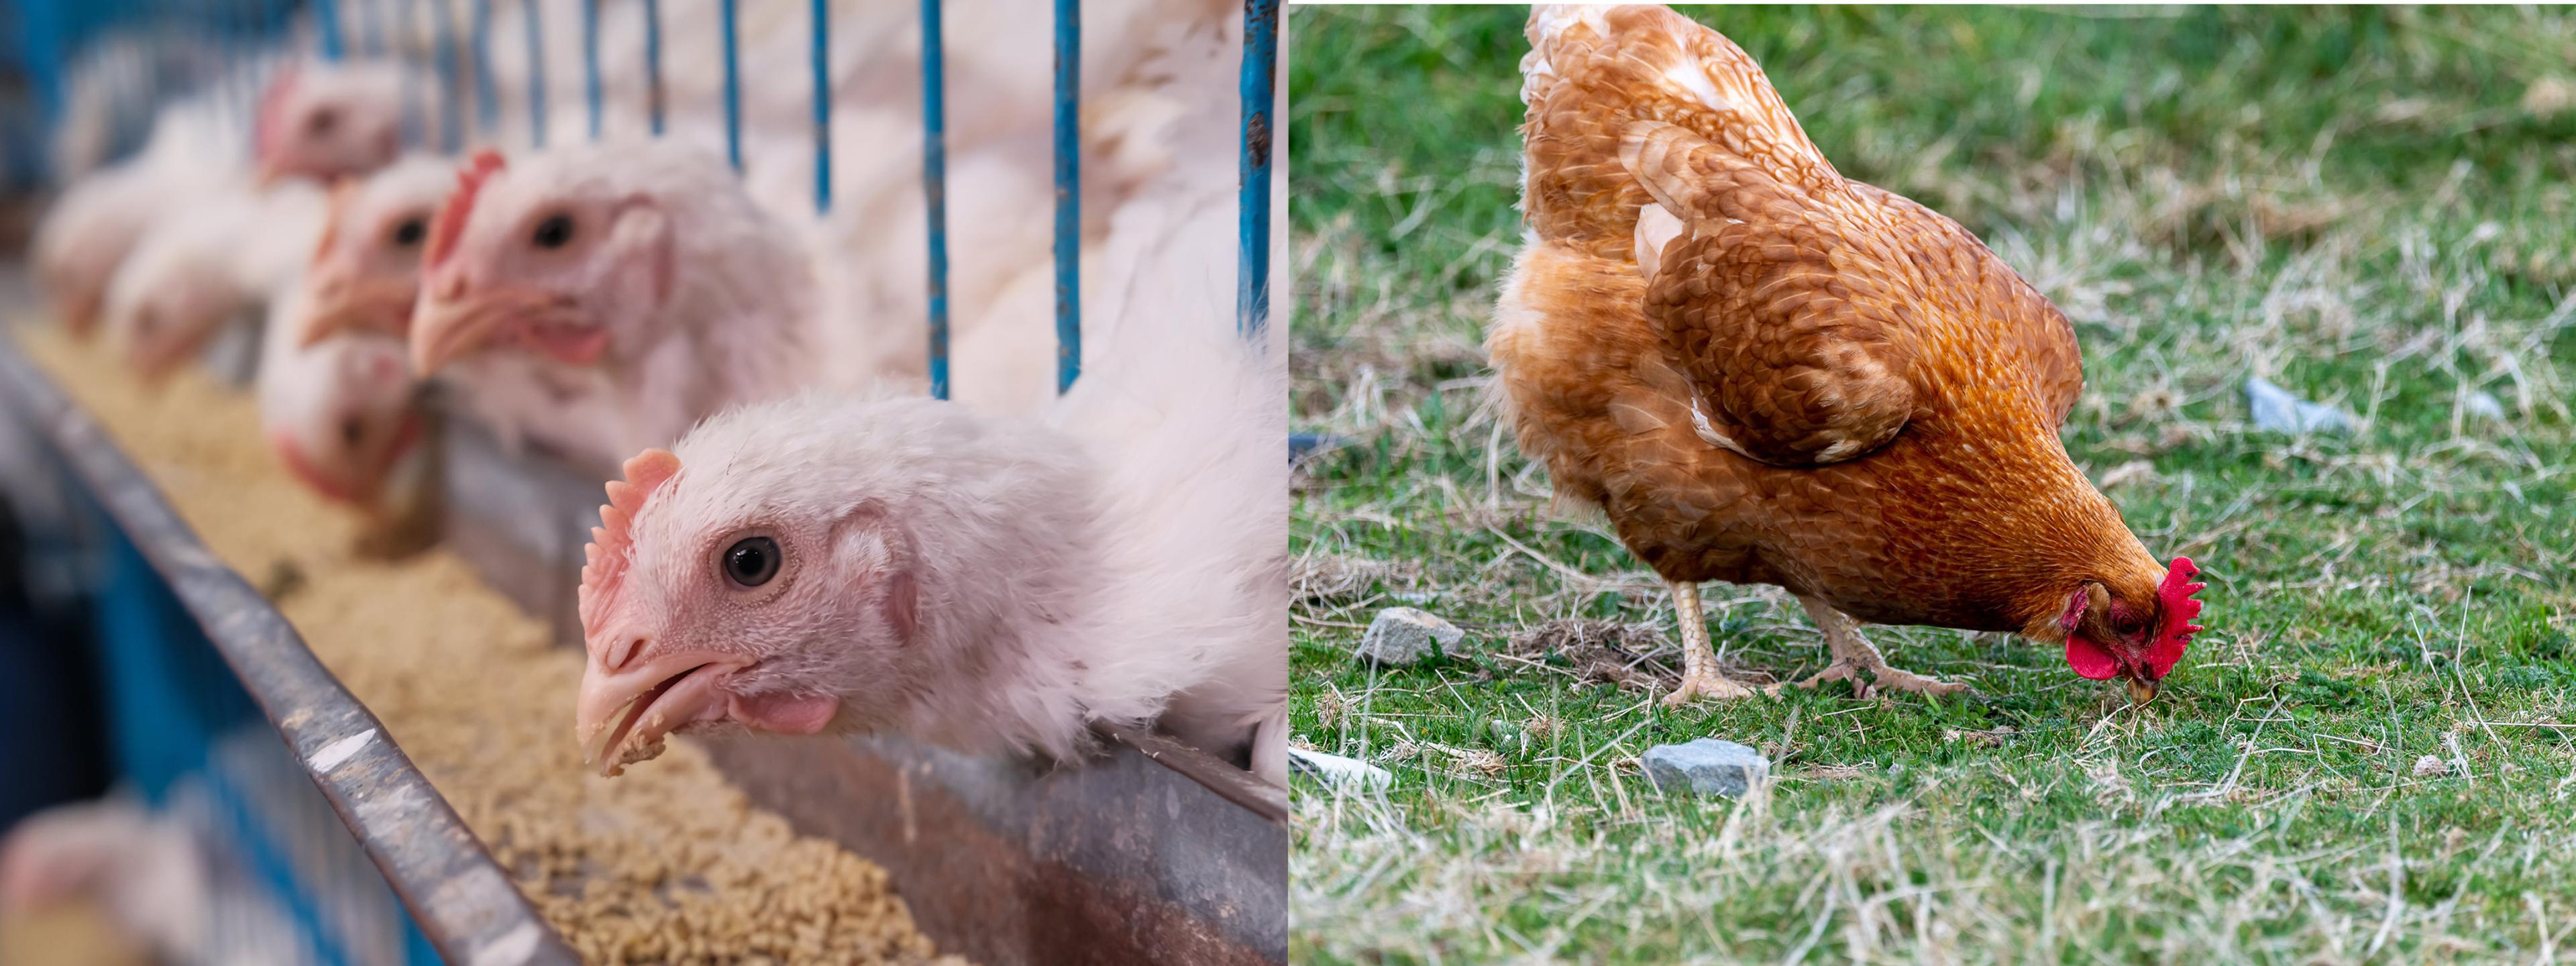 The photo on the left shows a chicken free to roam outdoors.